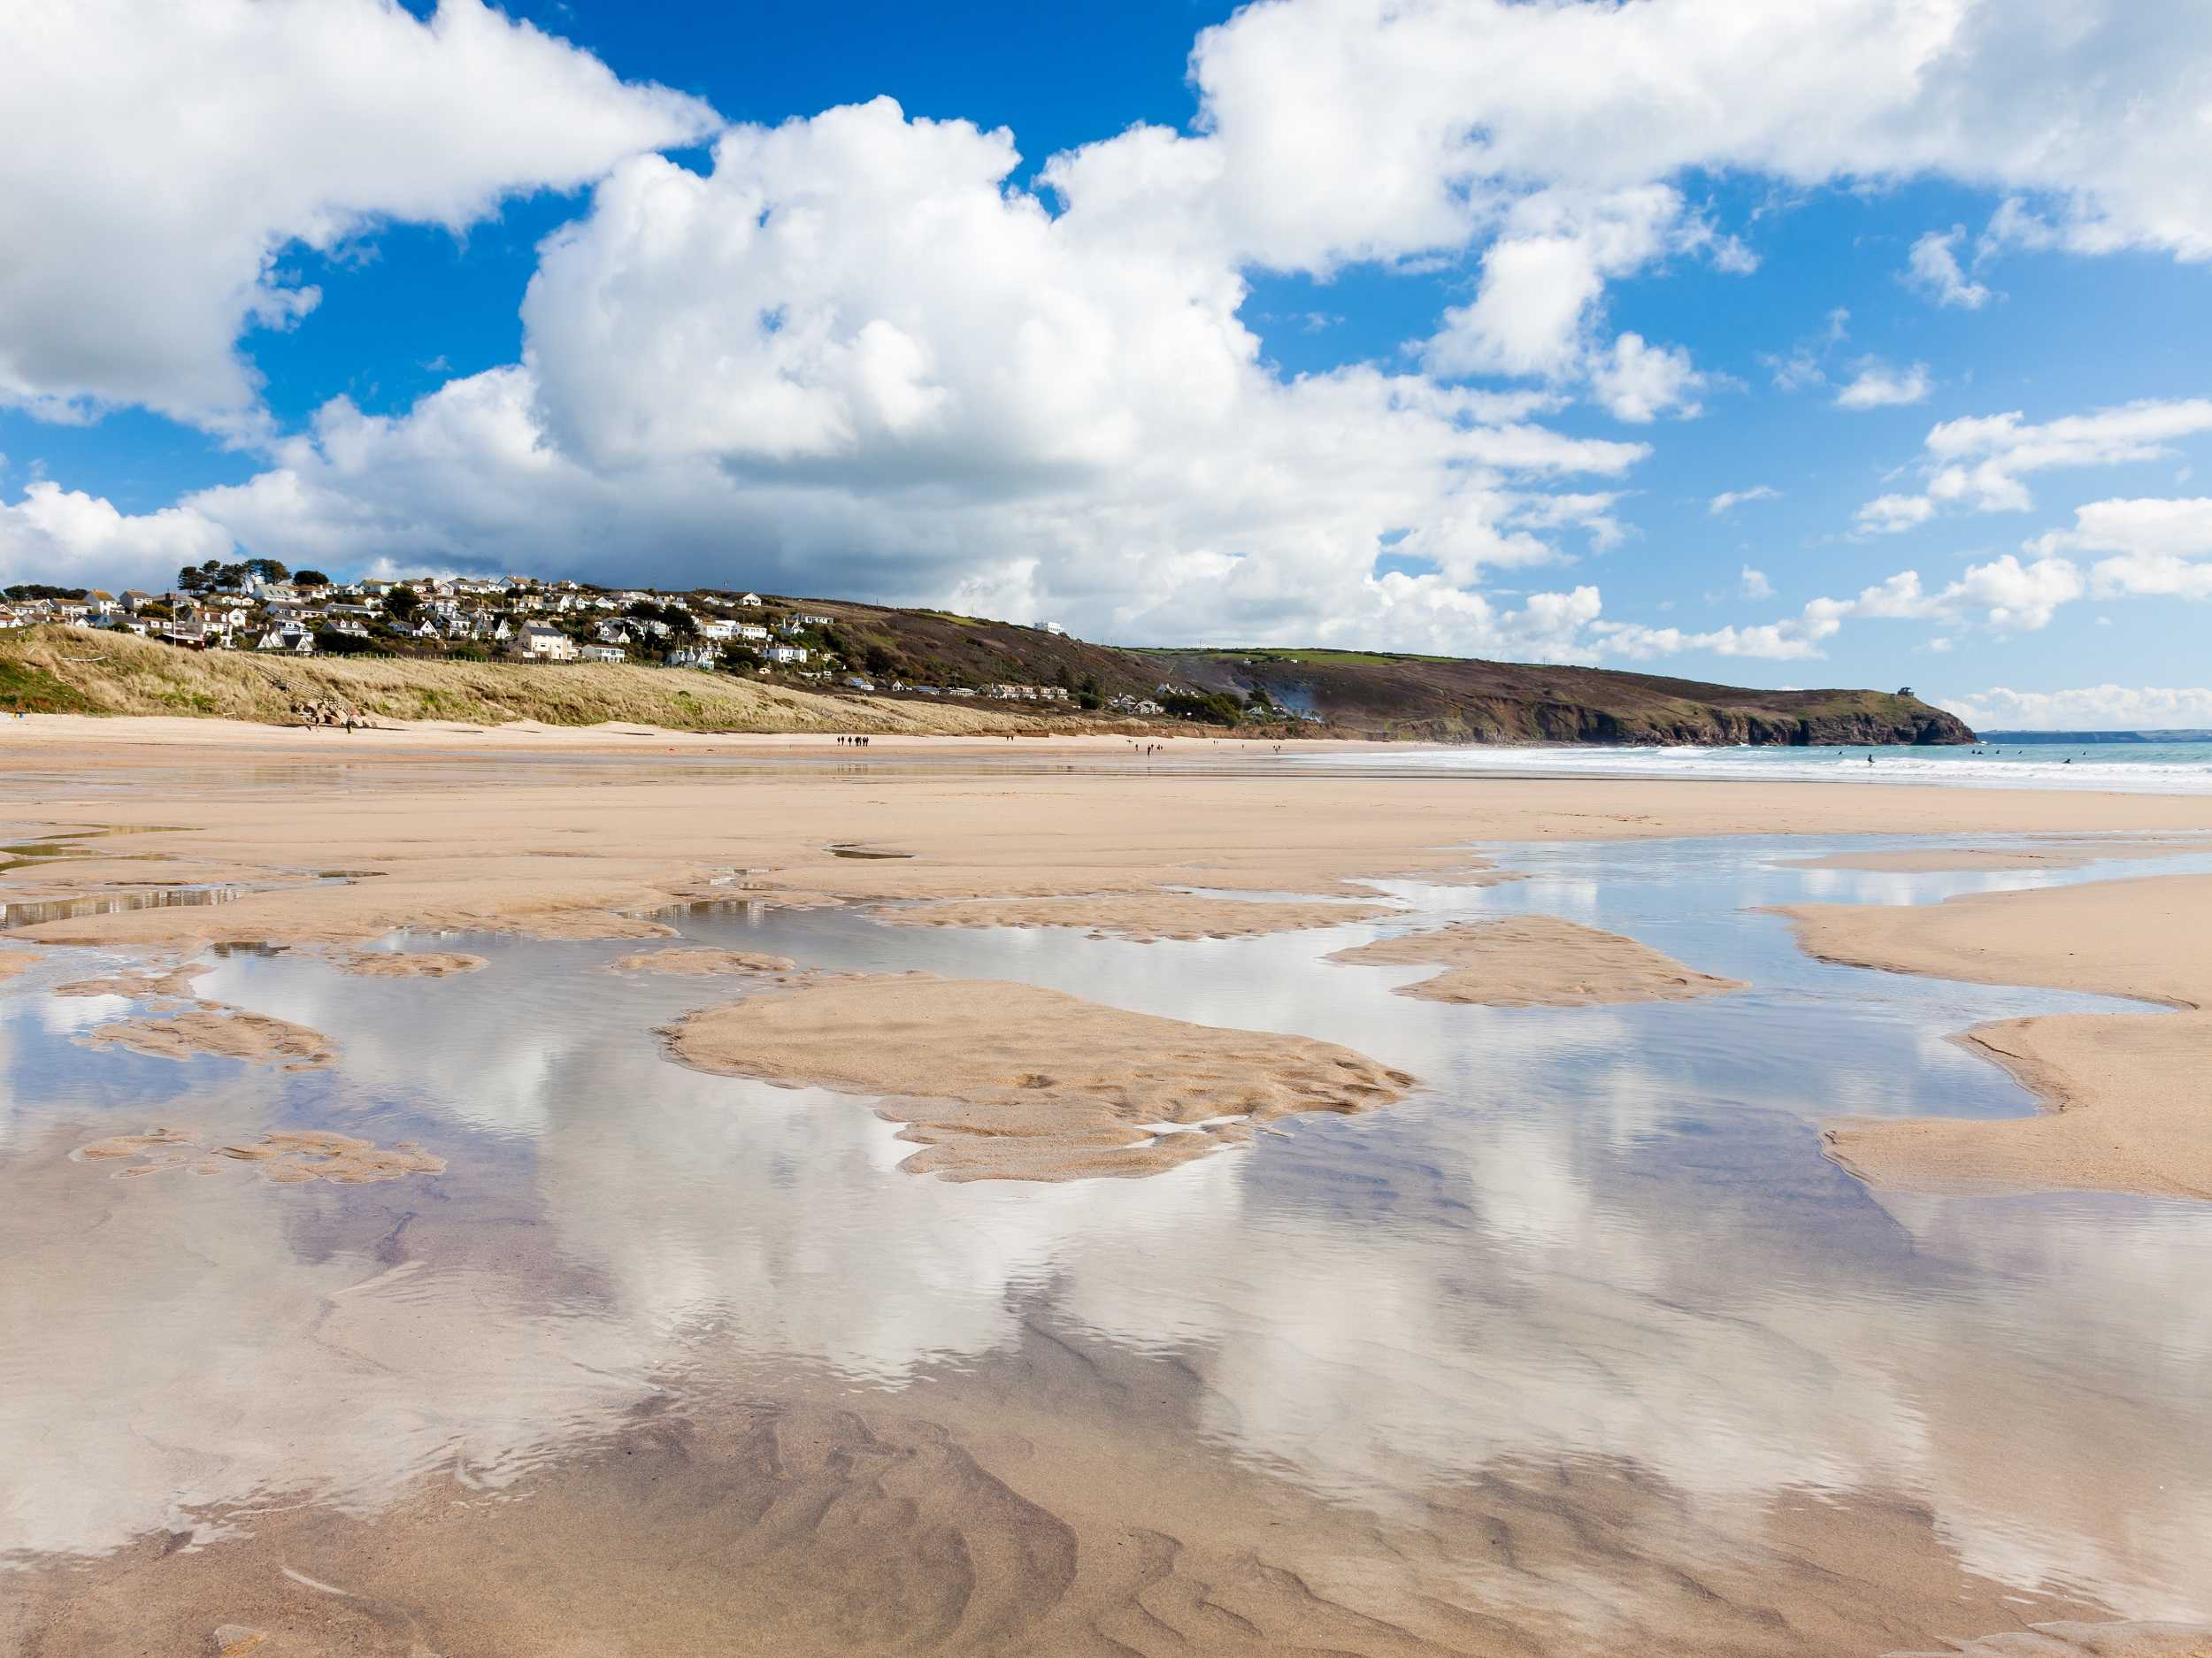 Free activities to try on your holidays to Cornwall